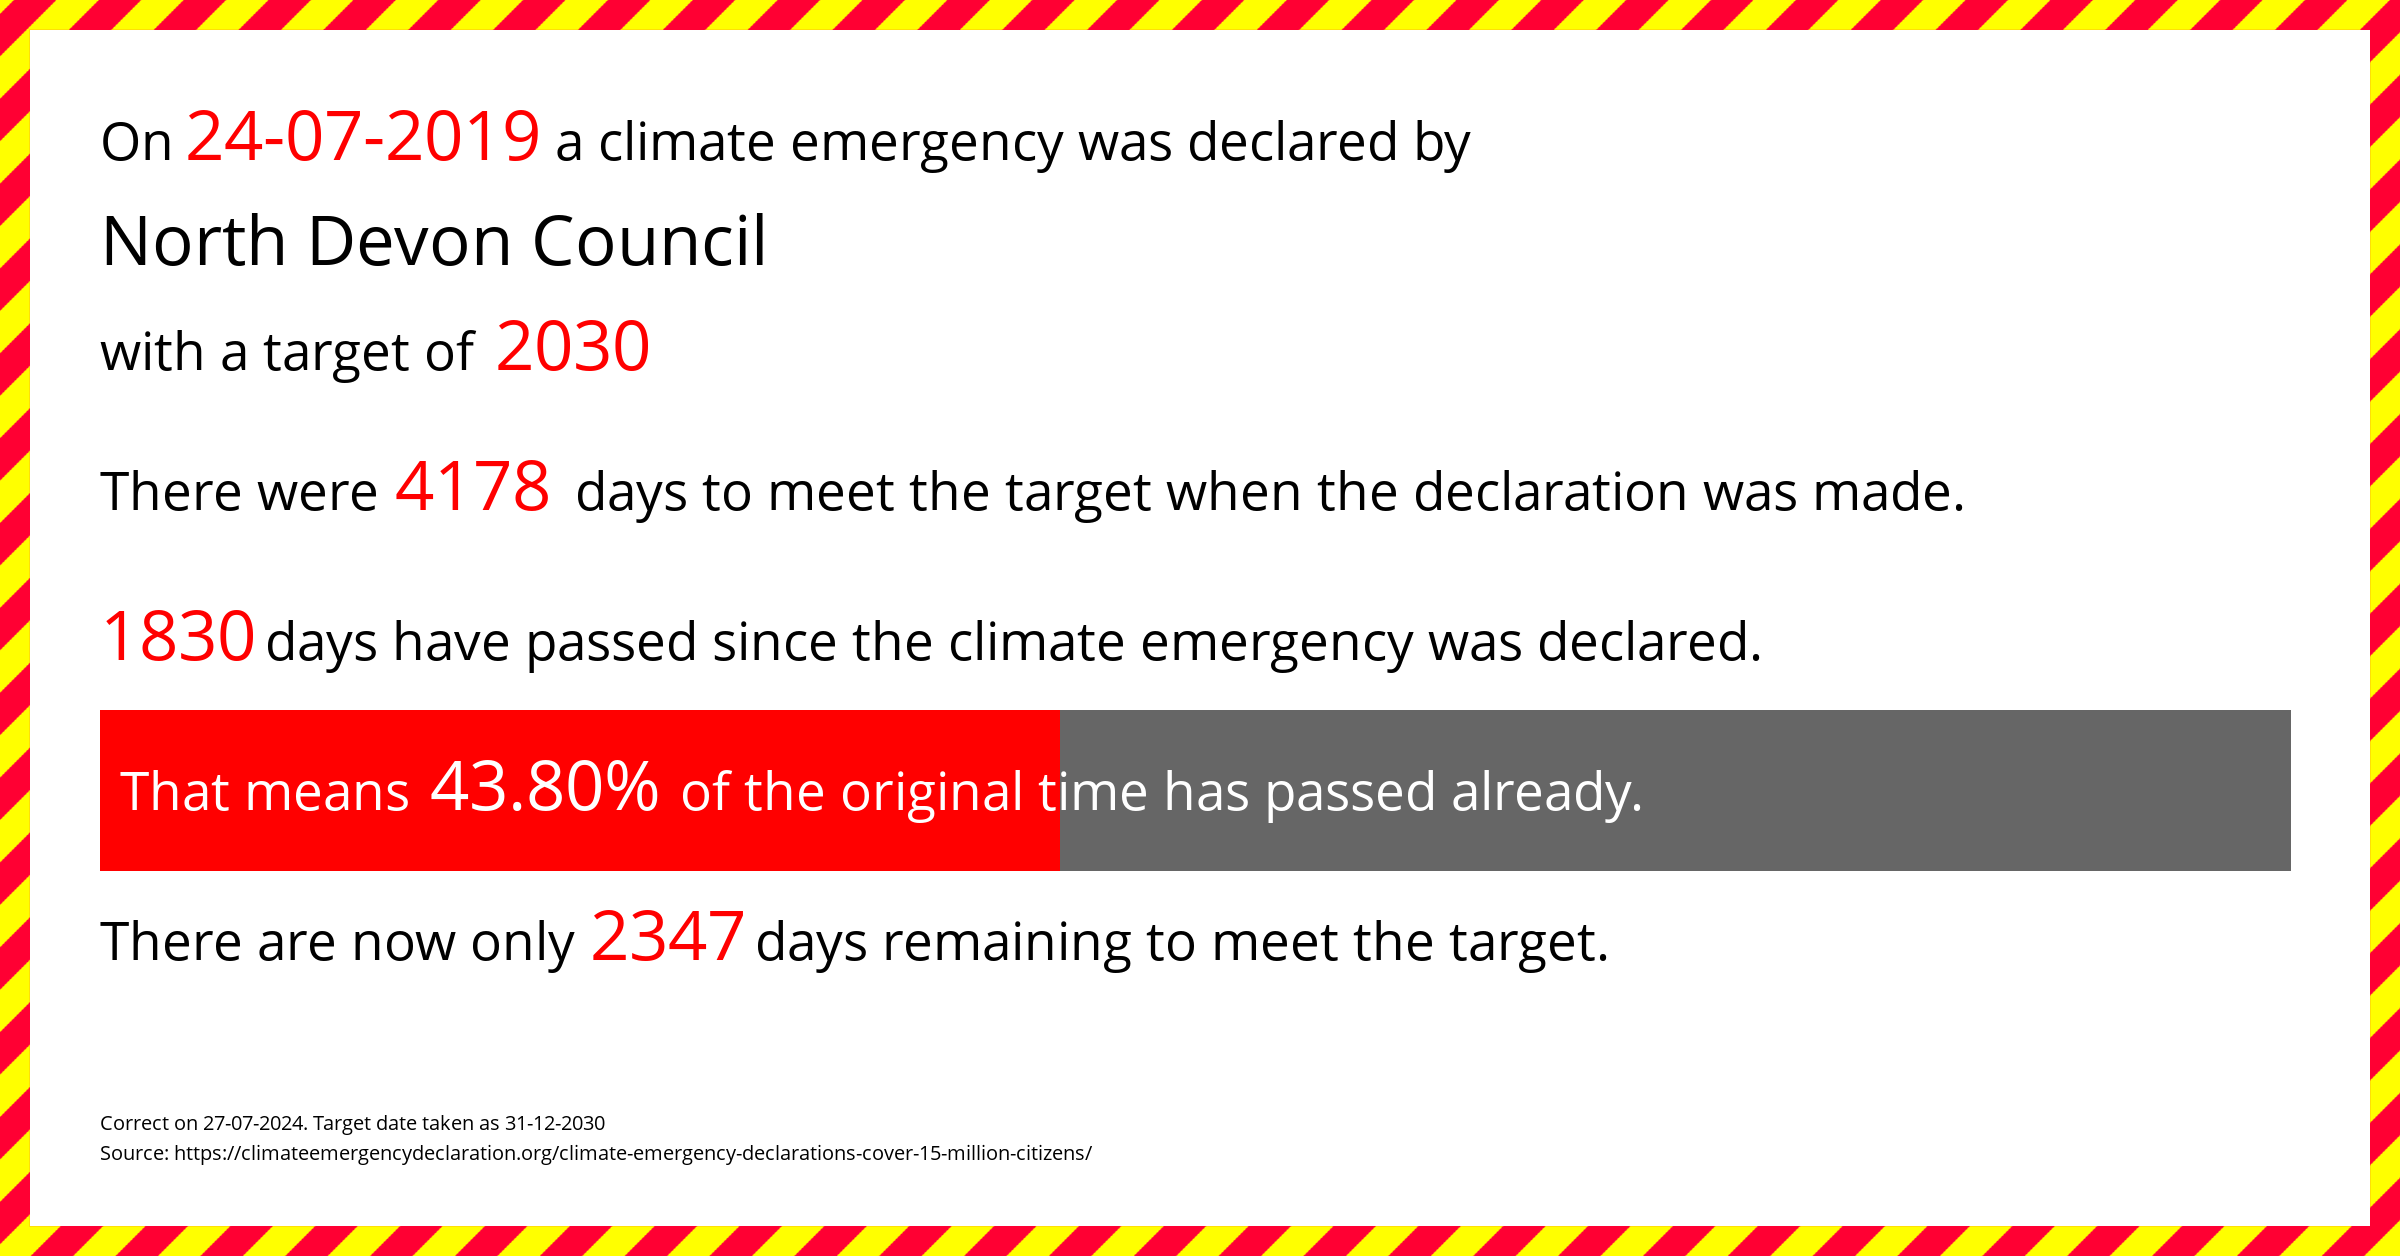 North Devon Council declared a Climate emergency on Wednesday 24th July 2019, with a target of 2030.